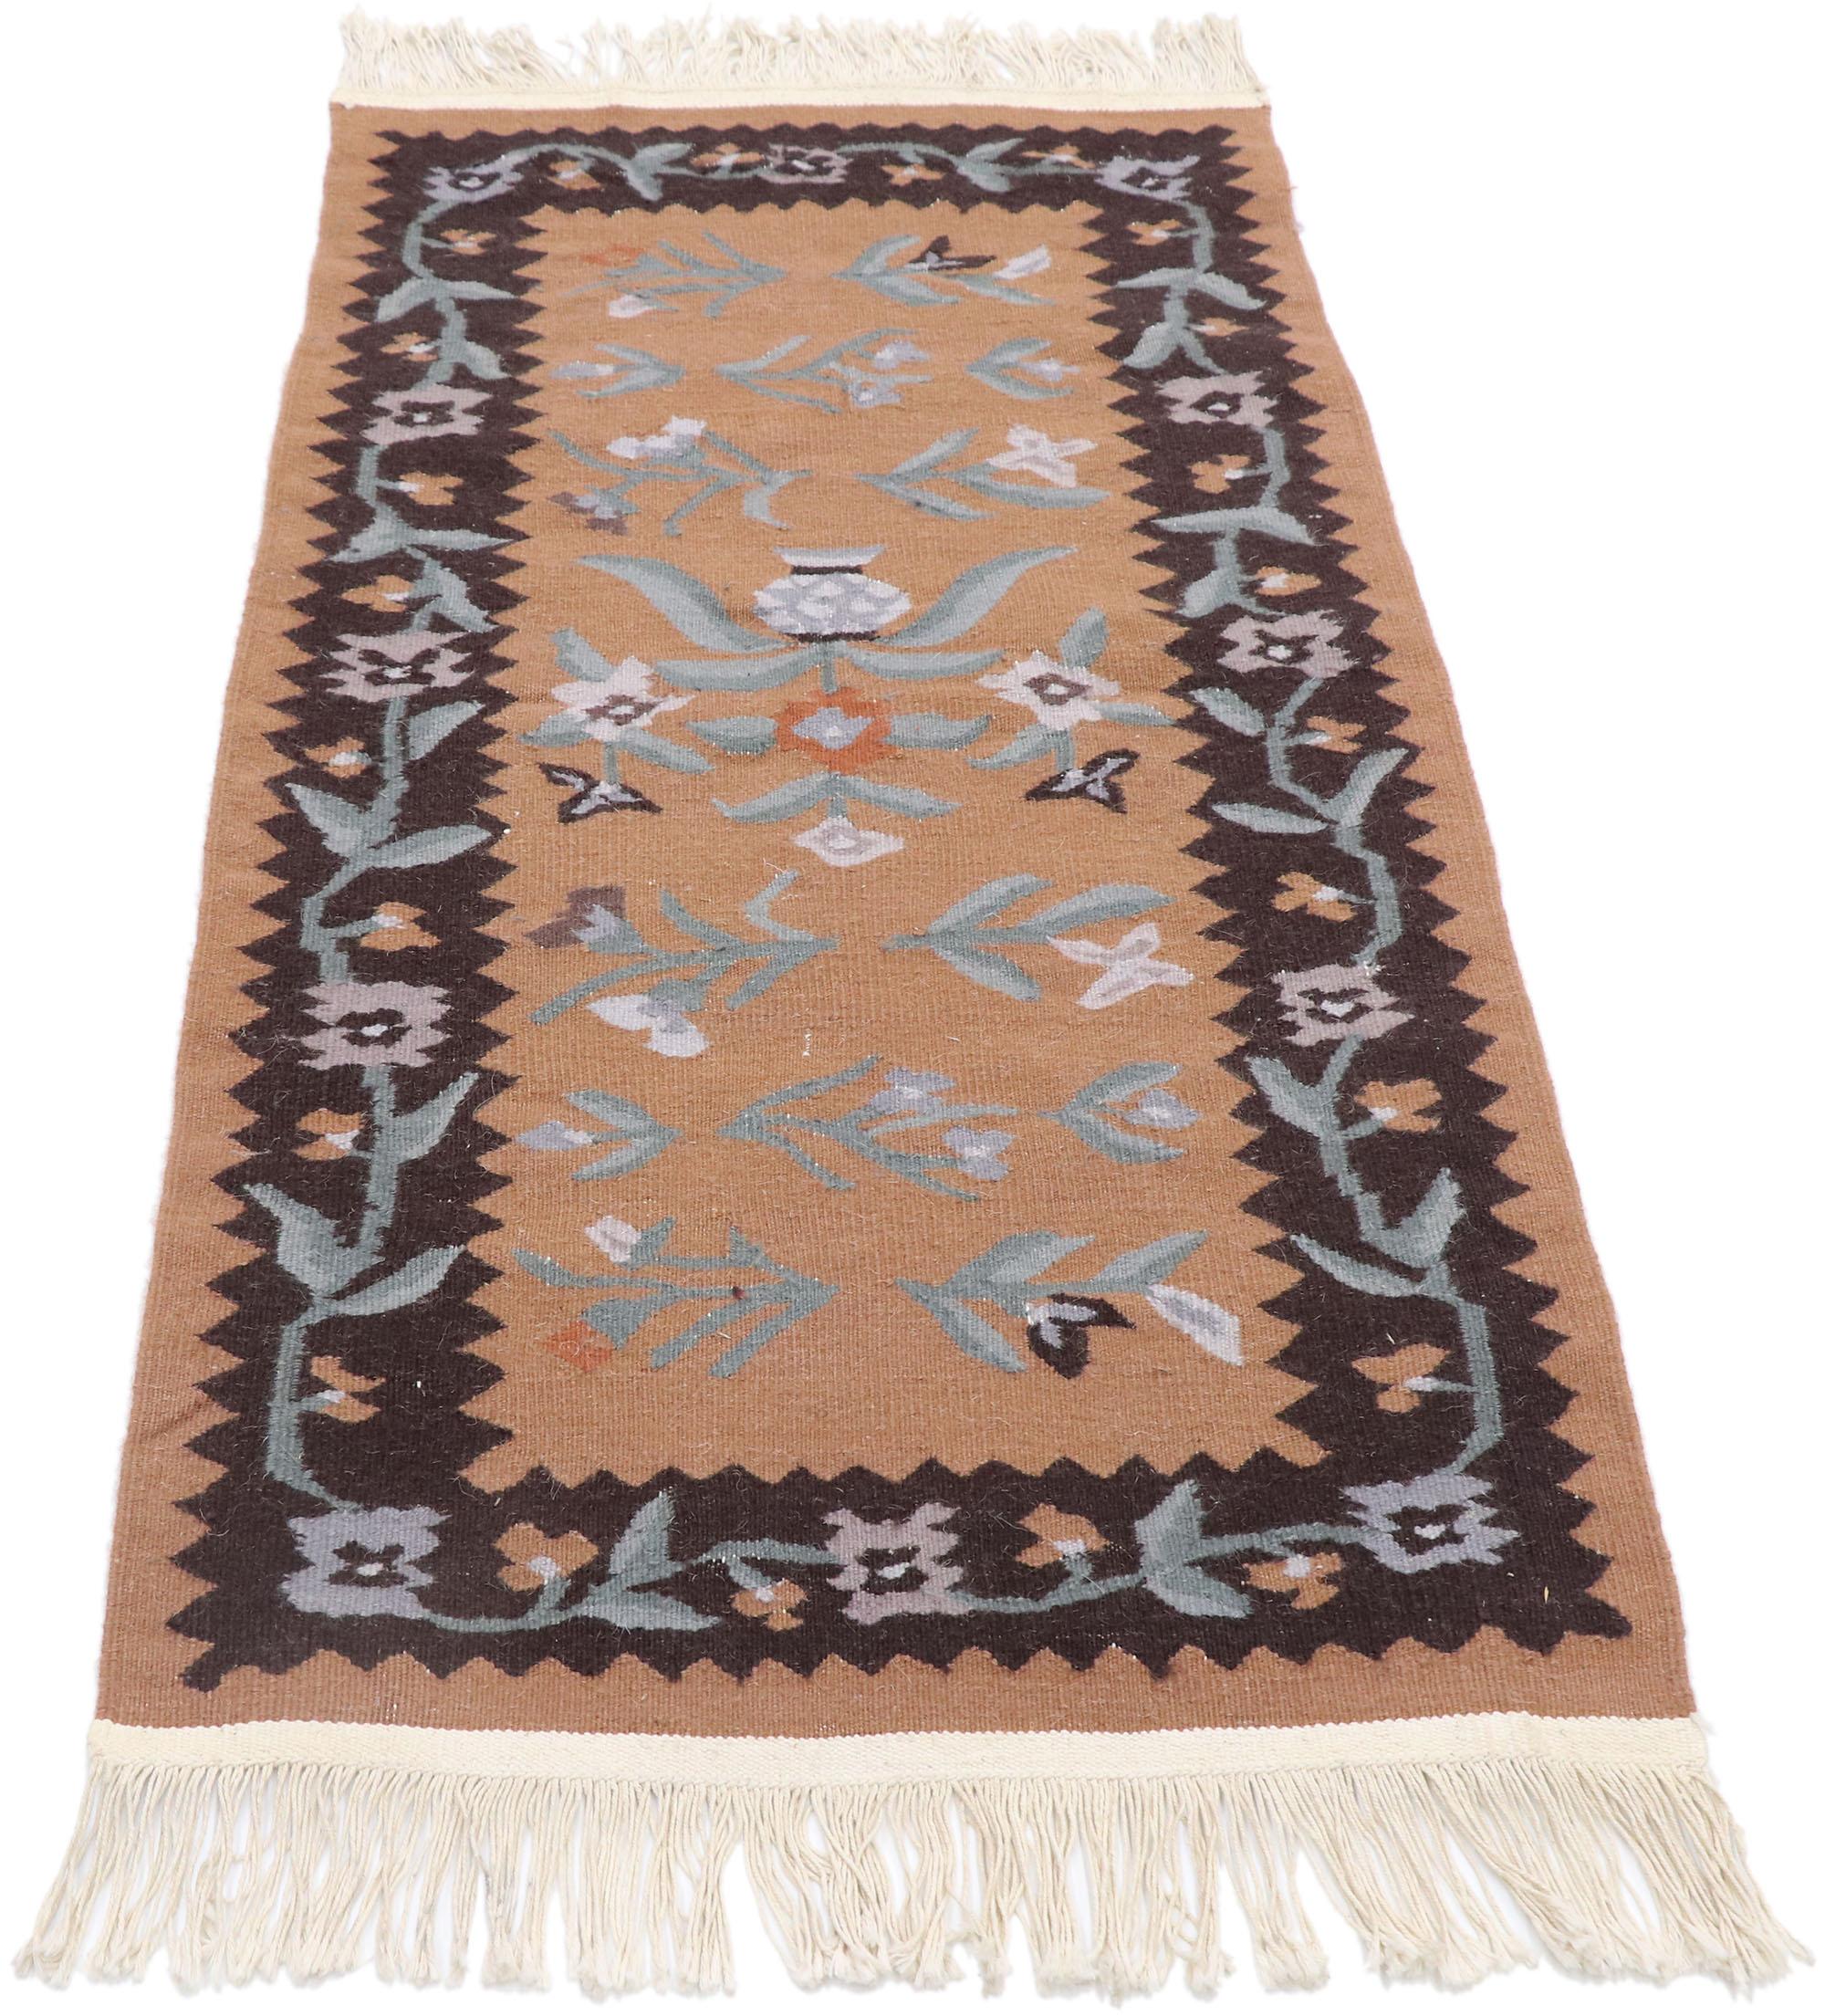 Hand-Woven Vintage Persian Shiraz Kilim Rug with Rustic Farmhouse Style For Sale